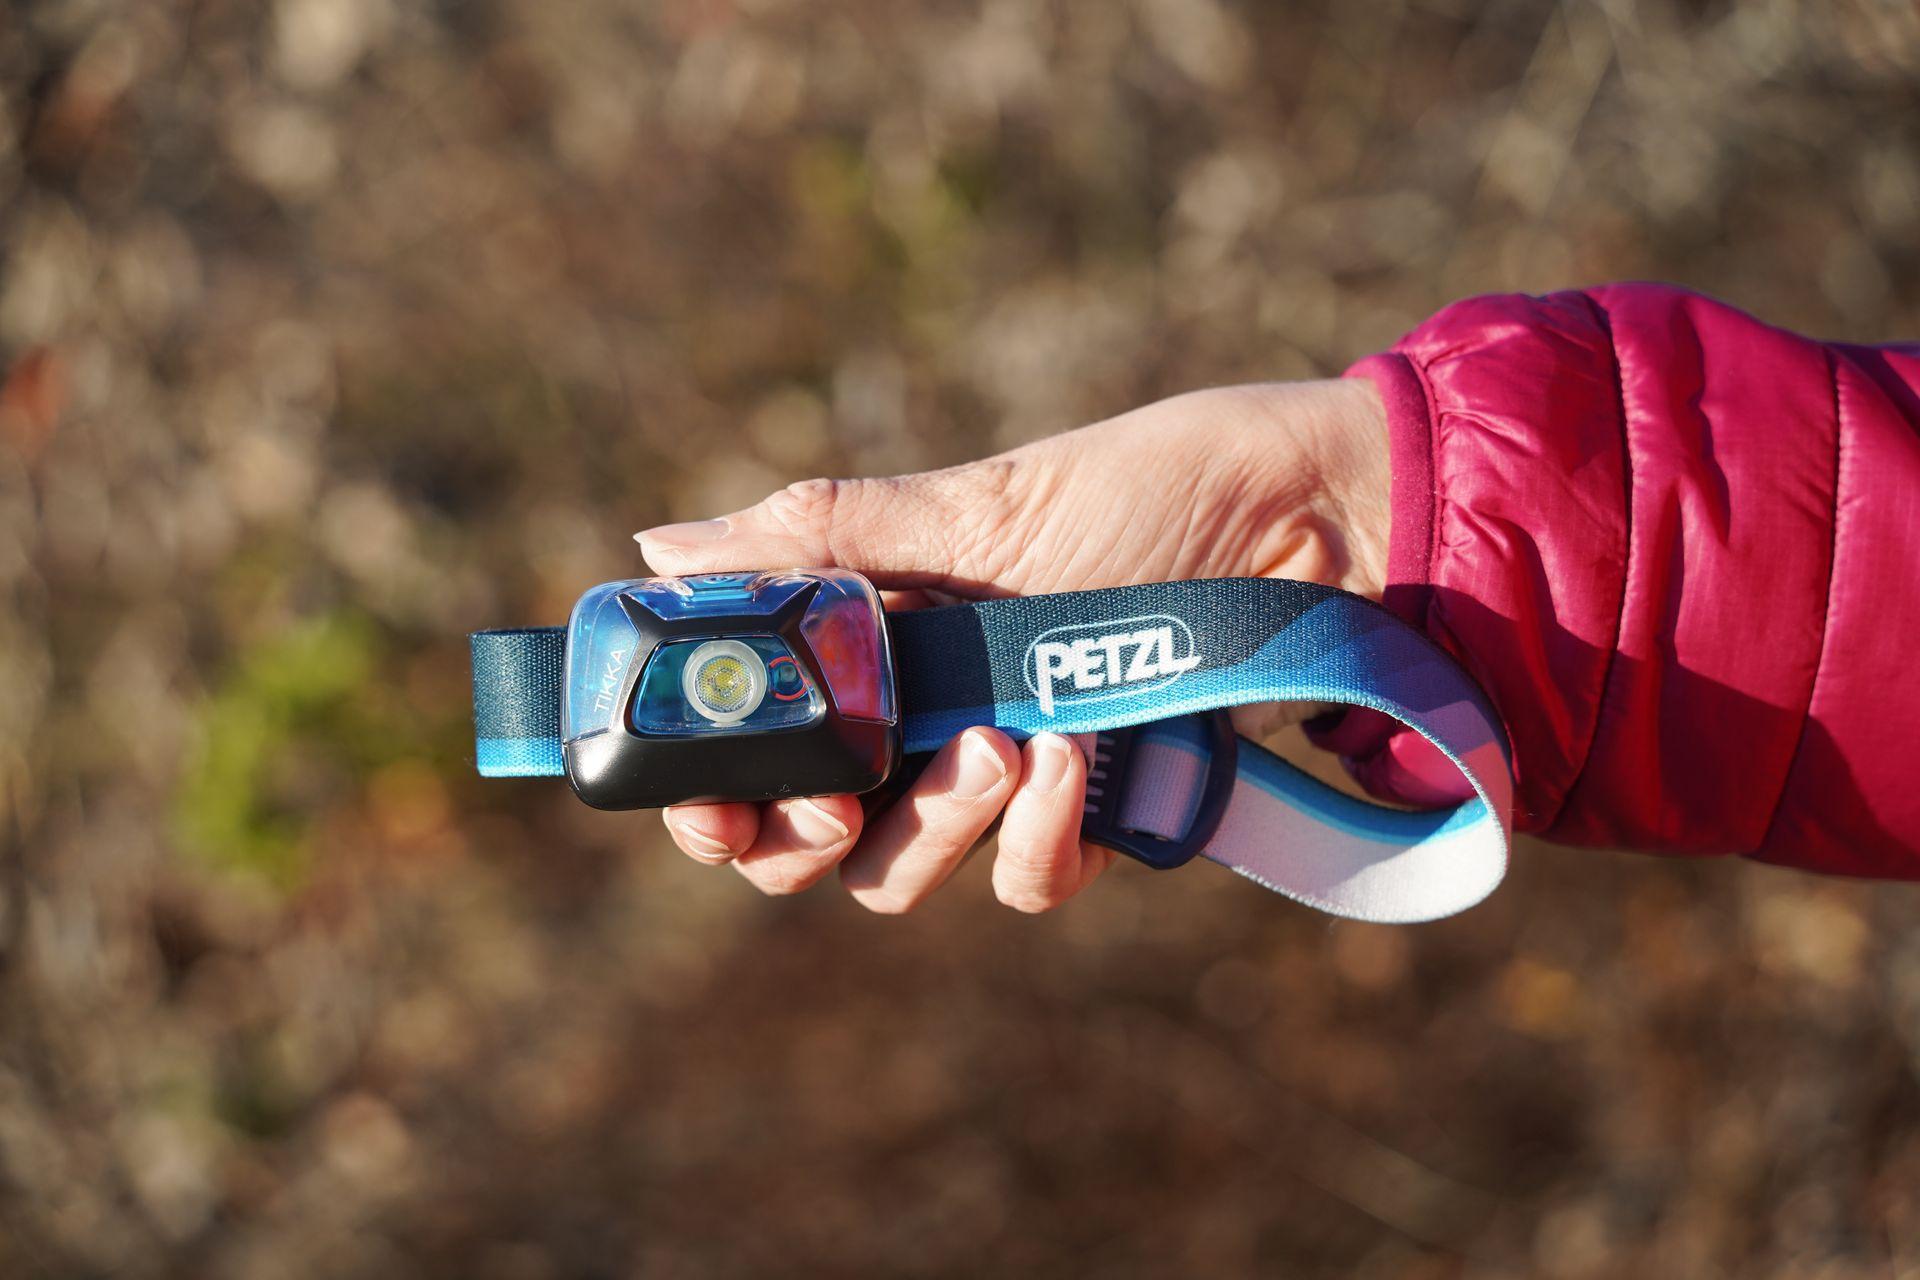 Holding up a Petzl head lamp.